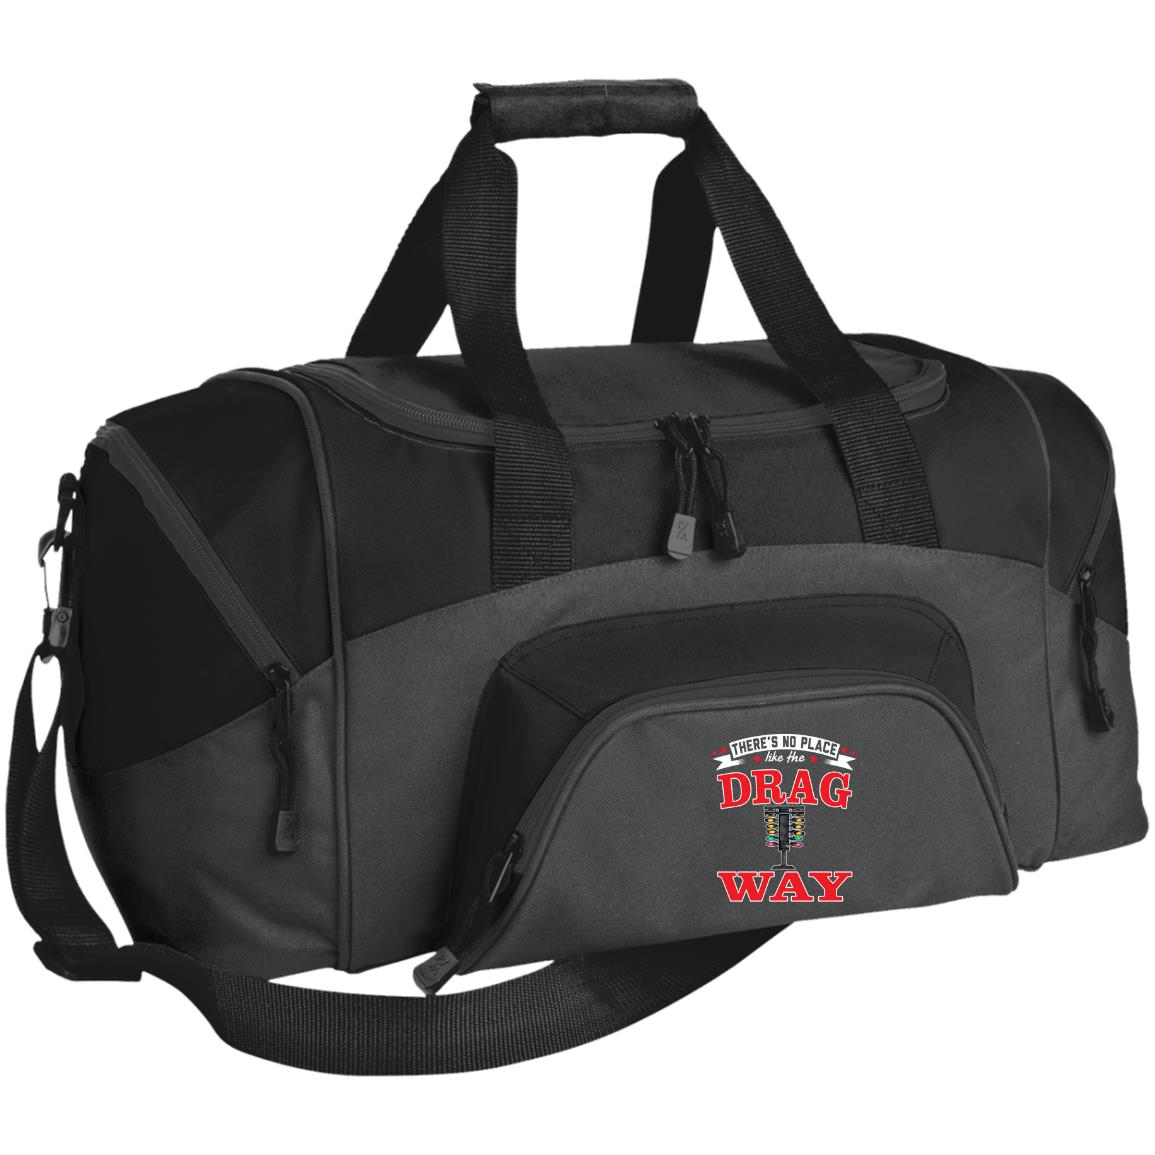 There's No Place Like The Dragway Small Colorblock Sport Duffel Bag